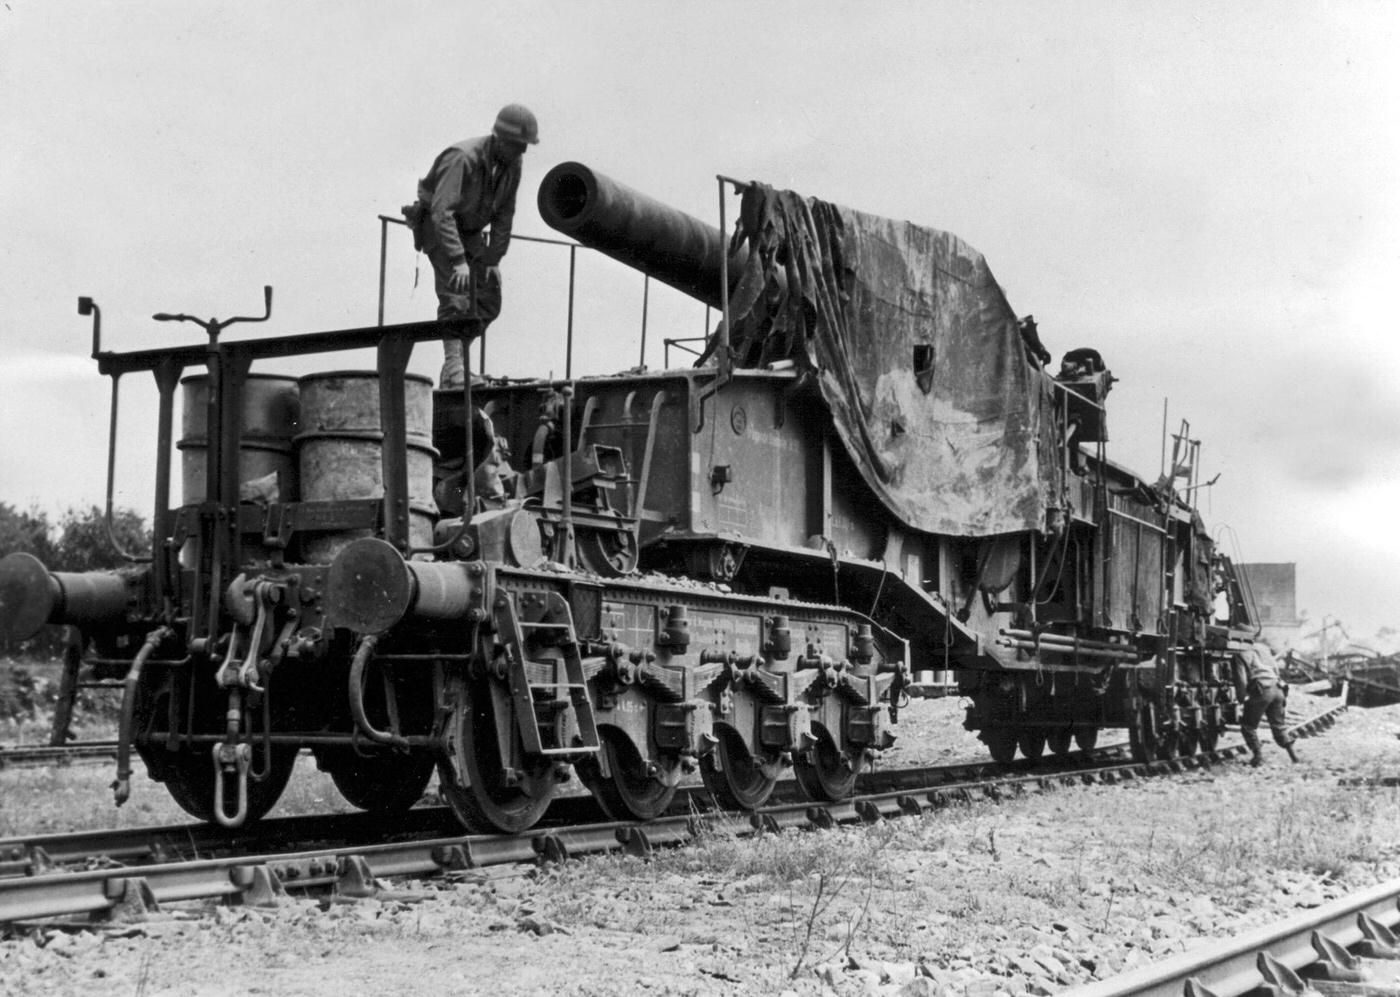 American soldiers examining an abandoned German giant gun on a railway southeast of Torigny-sur-Vire, France, in 1944.